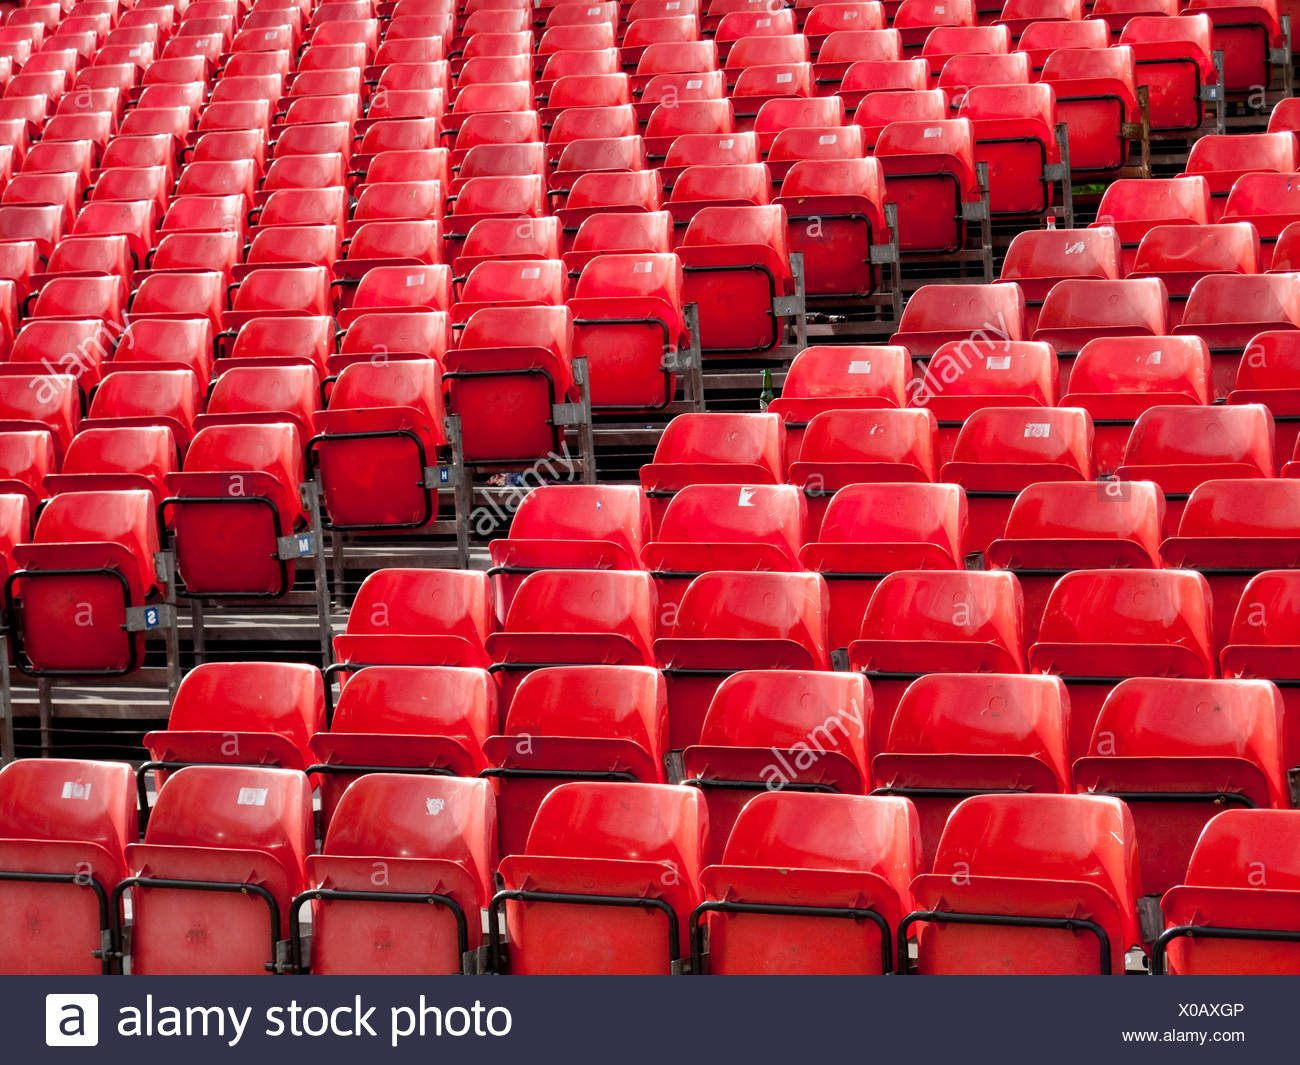 Rows Of Seats Stock Photos & Rows Of Seats Stock Images - Alamy